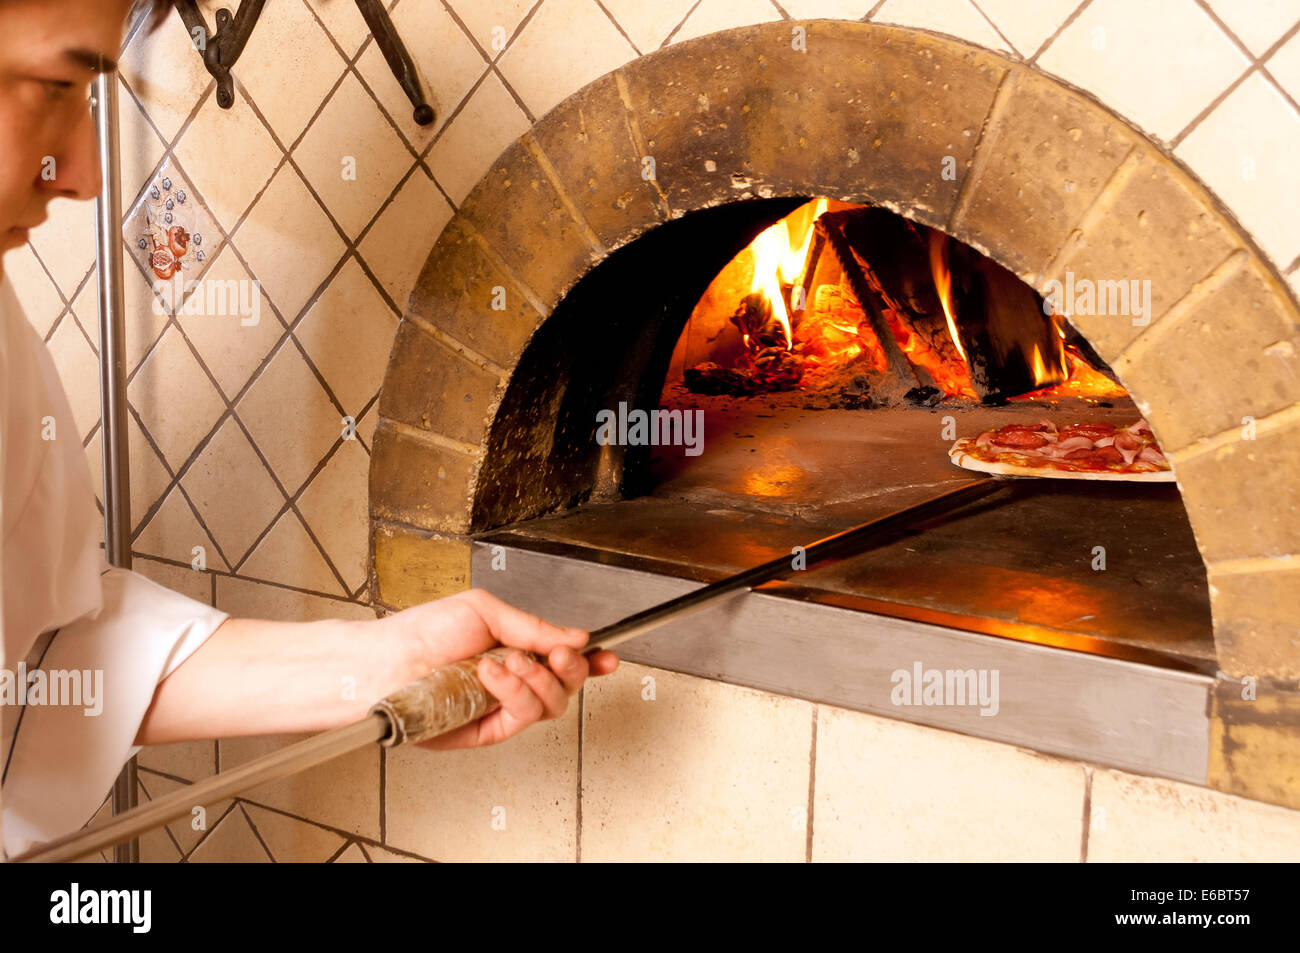 Baked pizza by the fire in traditional oven Stock Photo